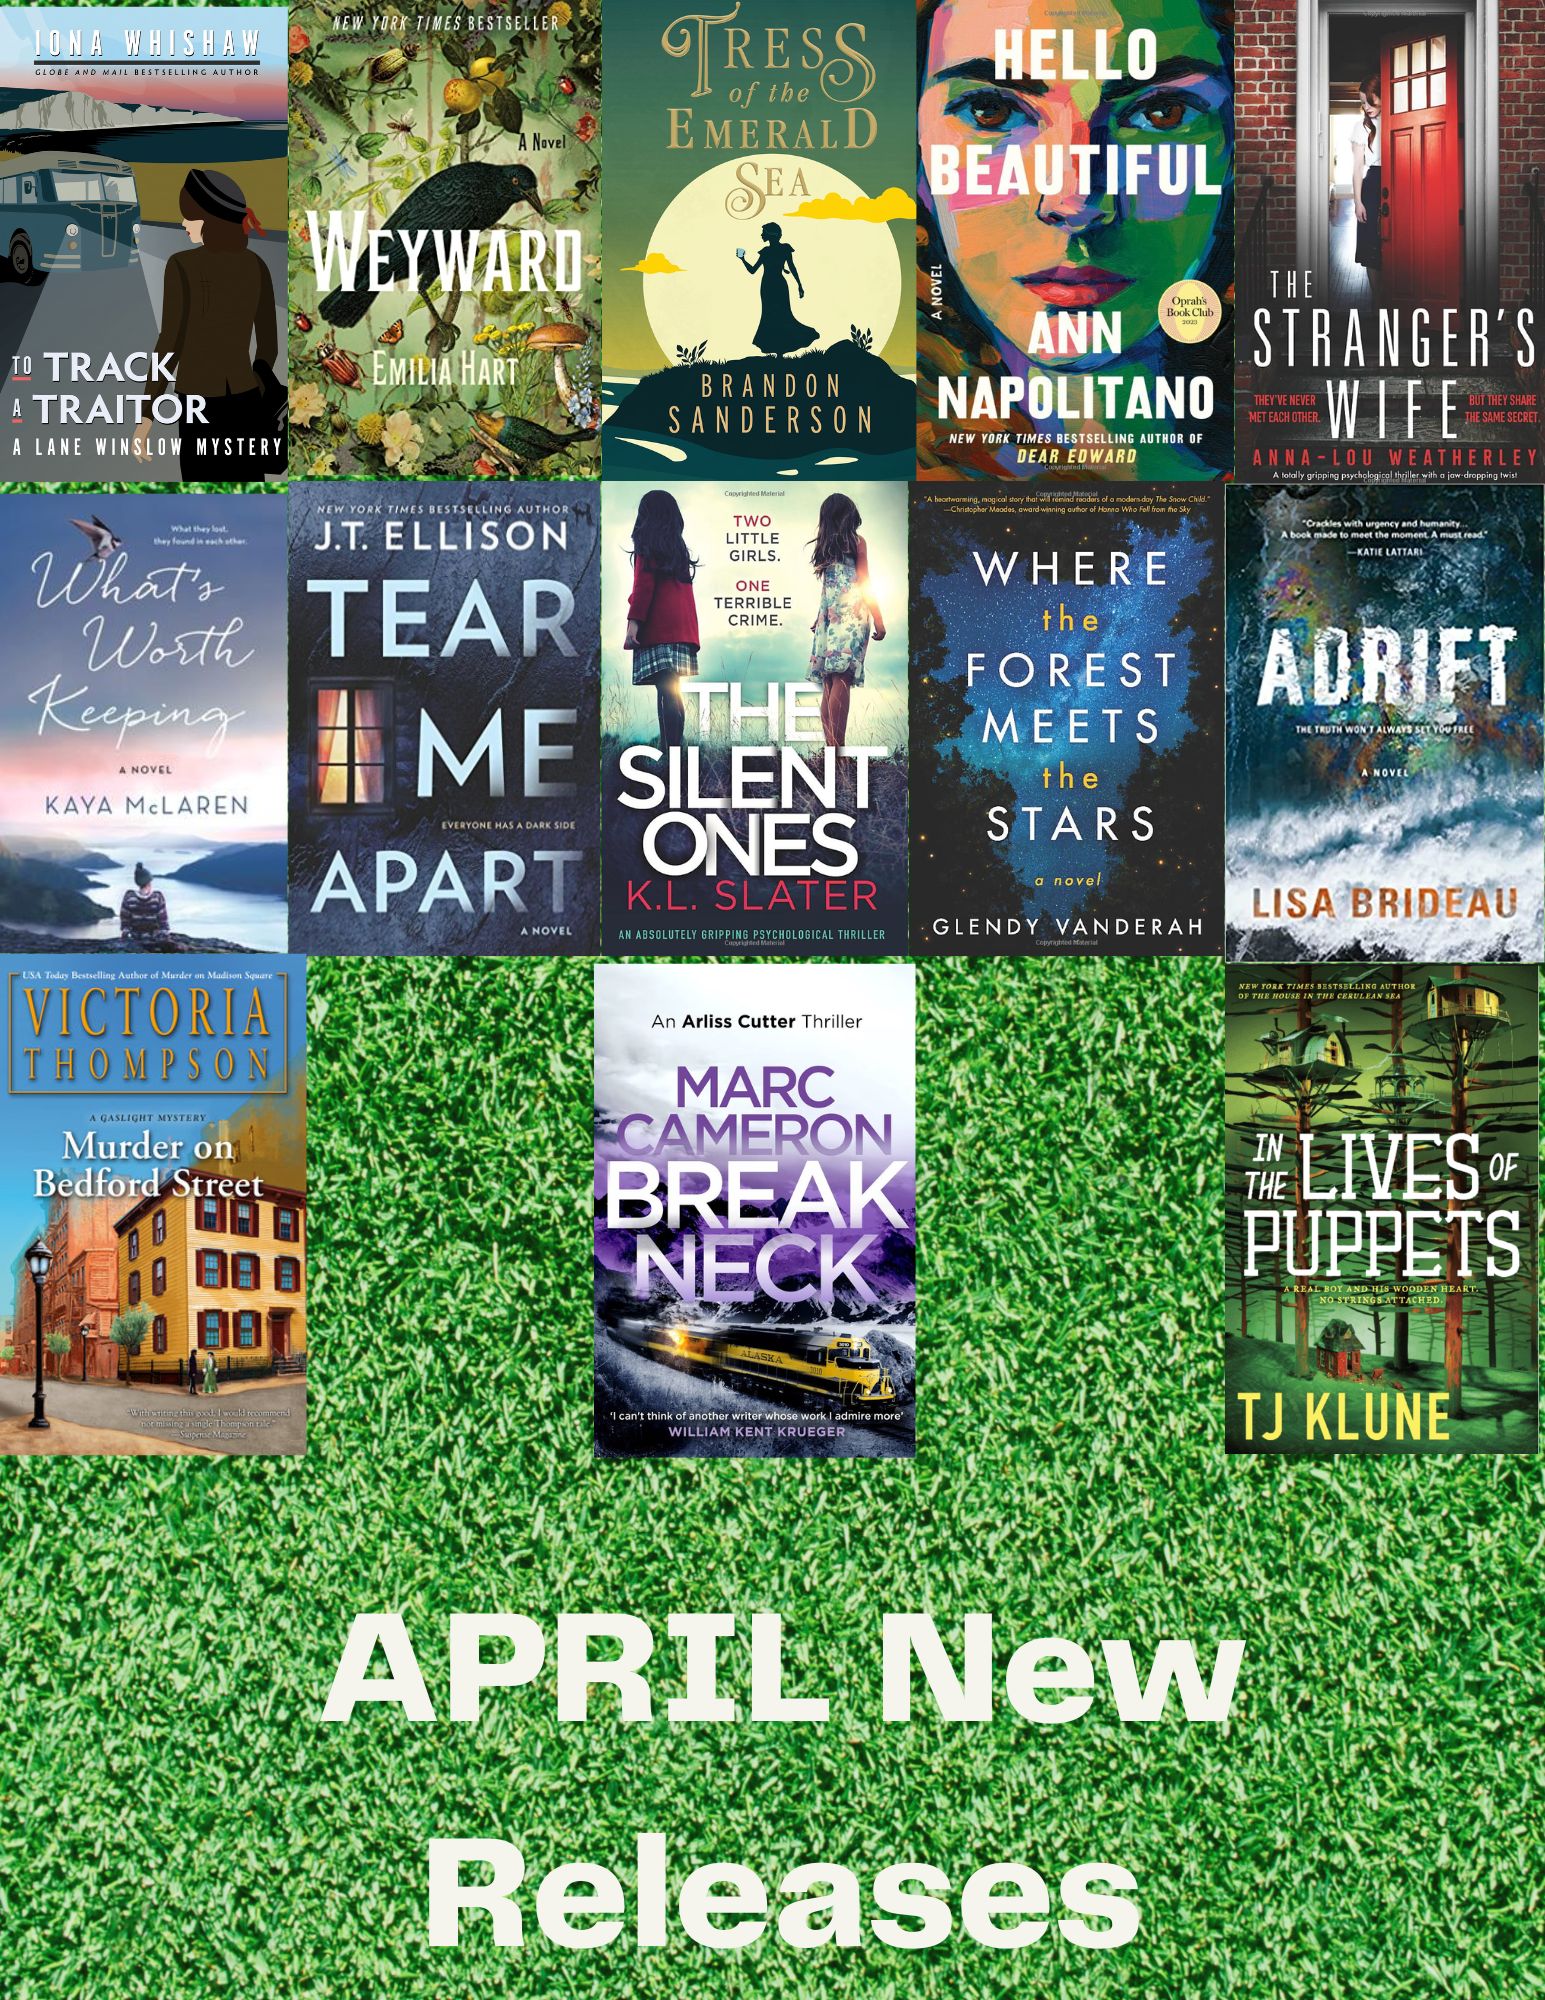 Adult New release fiction books for April 2023